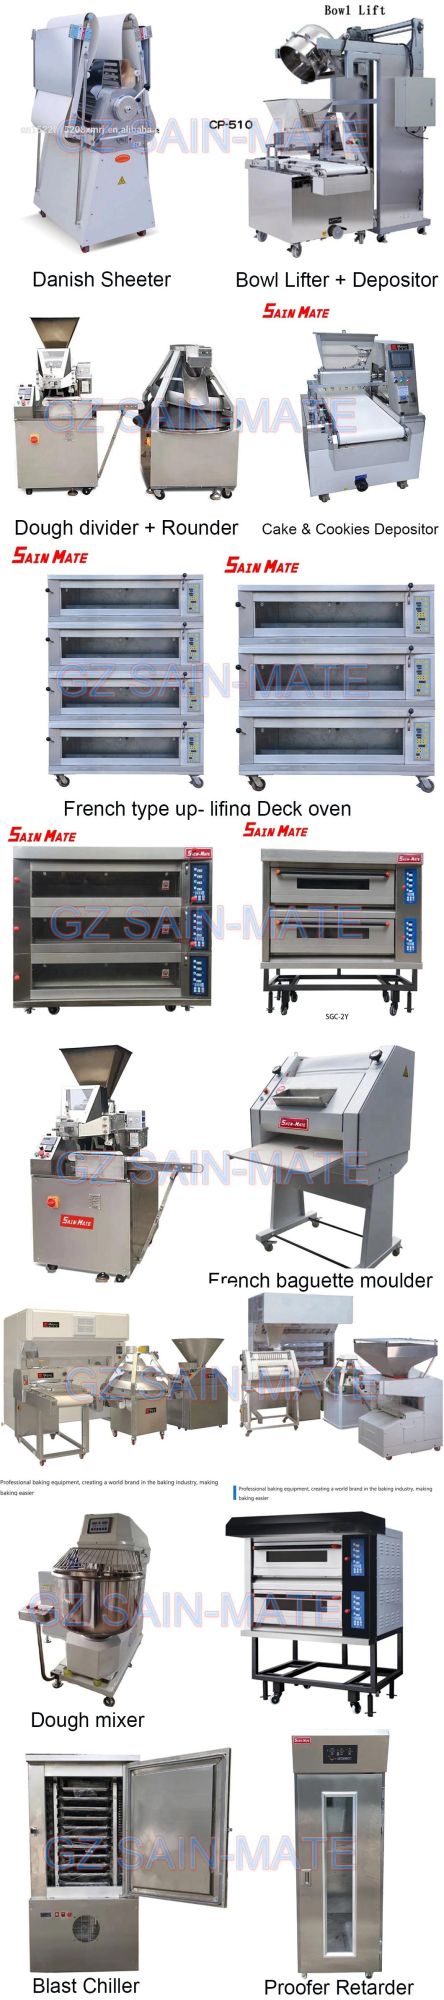 Commercial Electric Rotary Oven for Bakery in Dubai, Hot Wind 32 Tray Rotary Oven for Turkish Bread